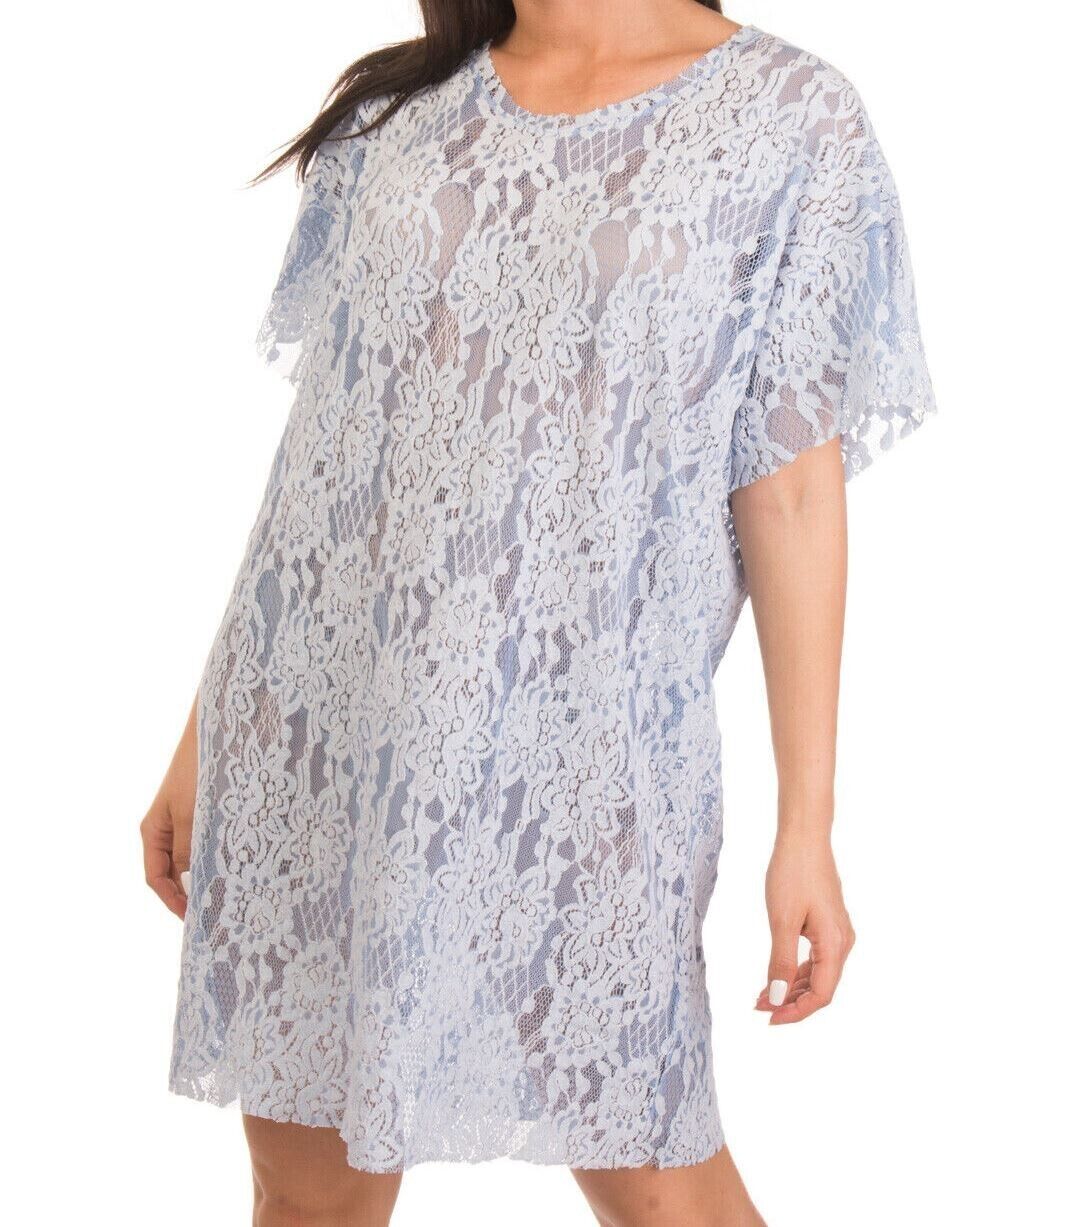 Image of RRP ?295 MM6 MAISON MARGIELA Lace Tunic Dress Size 36 / XS Stretch Made in Italy